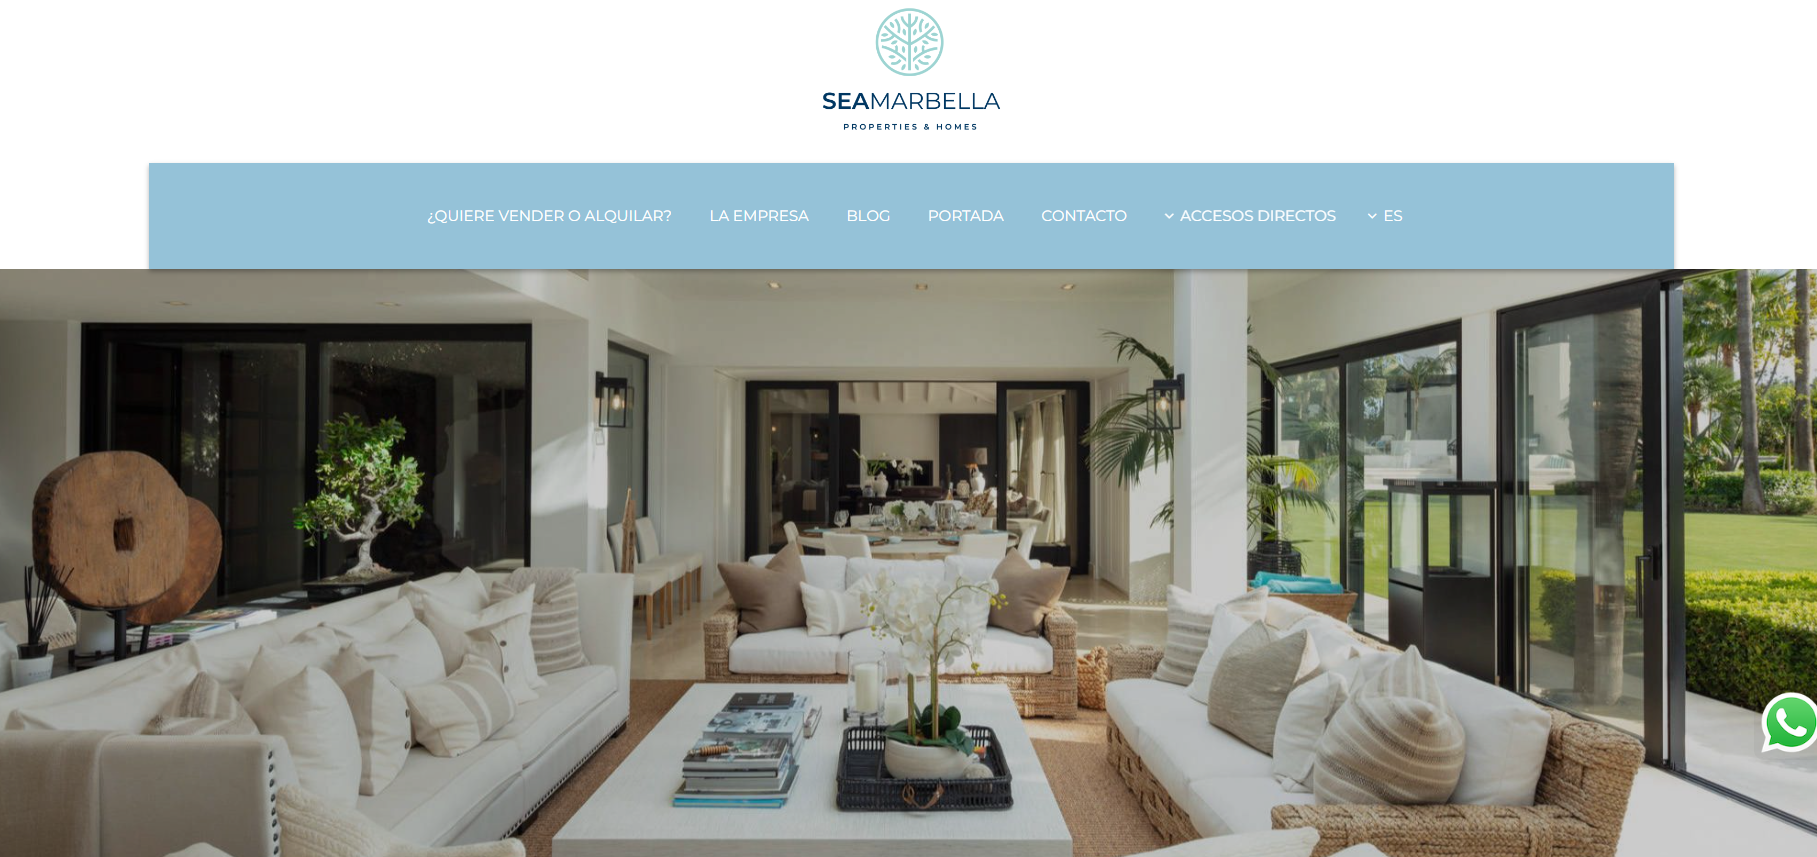 How to Avoid Disappointment When Buying Property: A Real Client Experience with the Real Estate Agency Seamarbella in Spain